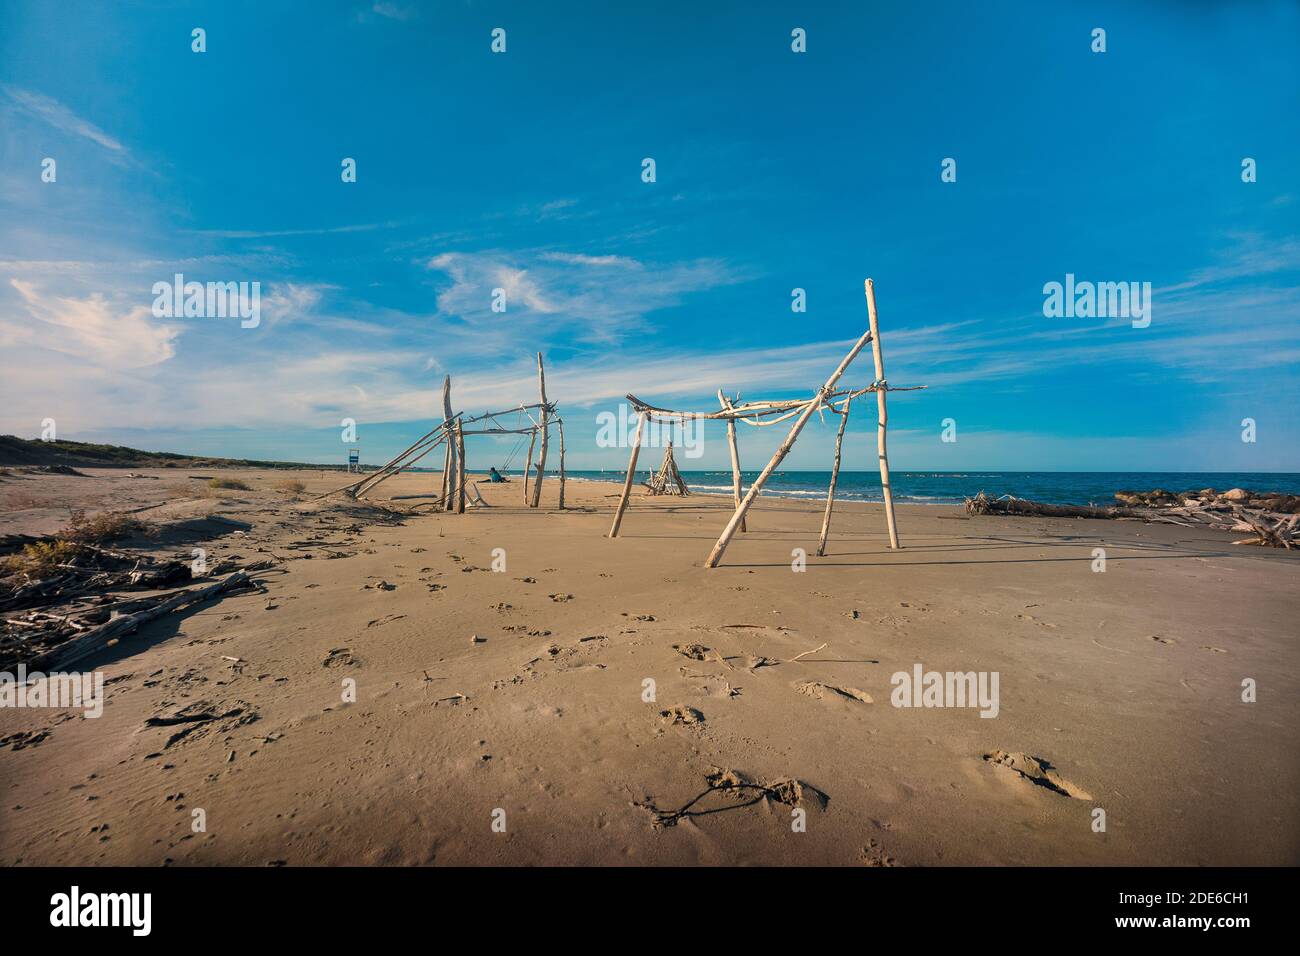 Campomarino, Molise, Italy: structure of old hut on the beach Stock Photo